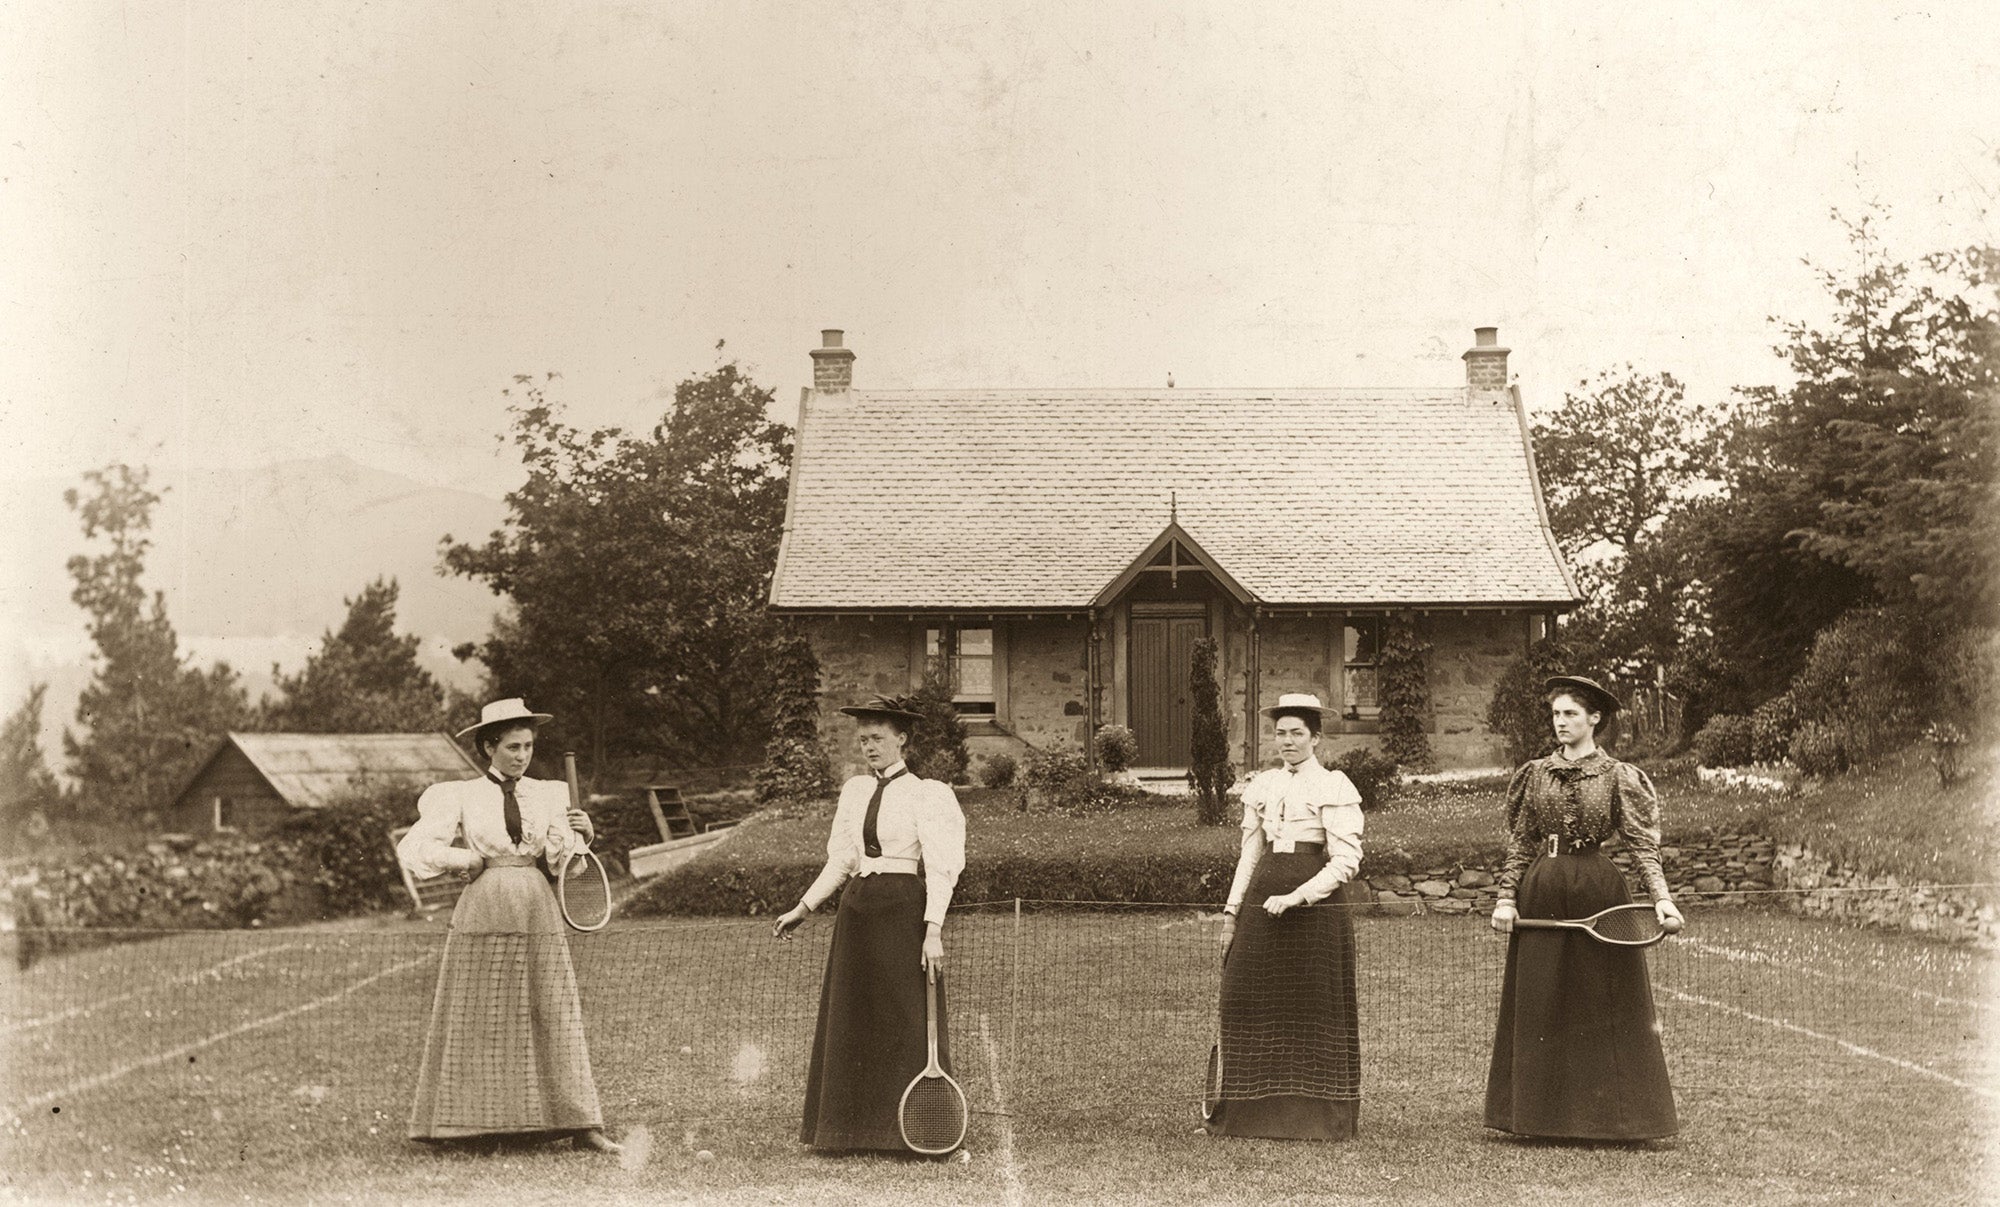 Four Victorian ladies in full-length skirts prepare for a game of lawn tennis.